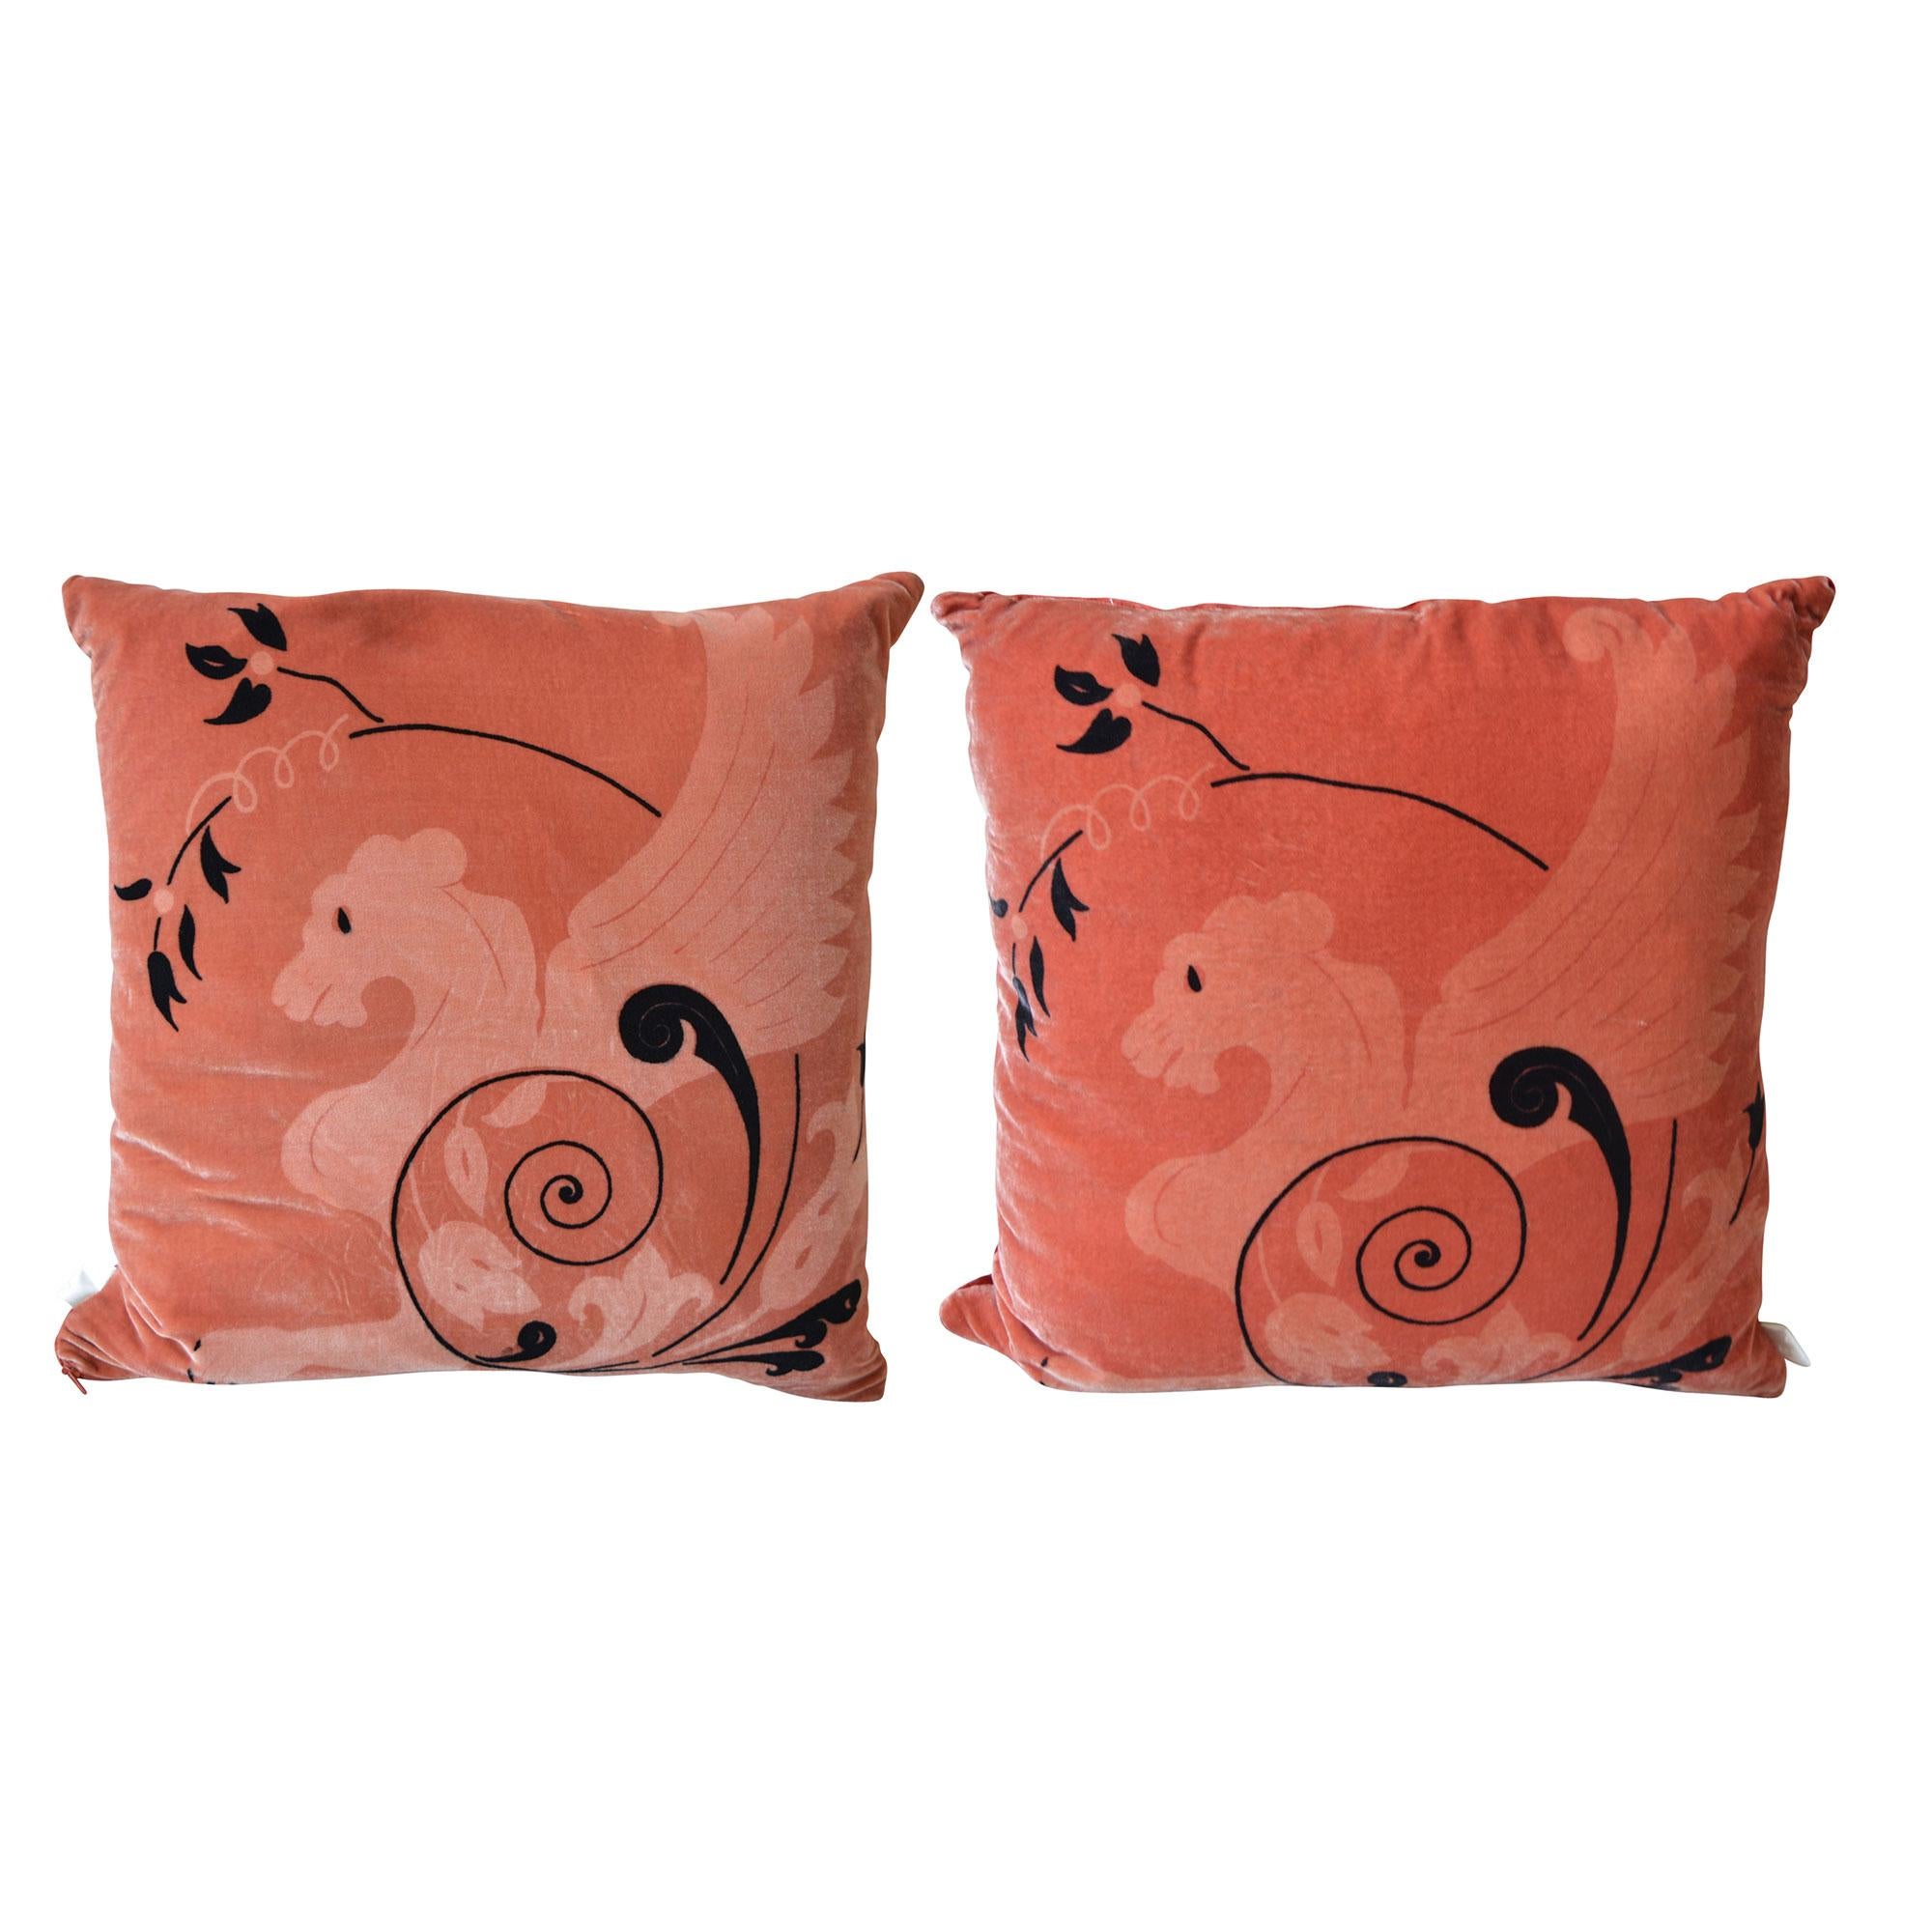 Designer Decorative Pillow Sphinx Design, Pair In New Condition For Sale In Pataskala, OH